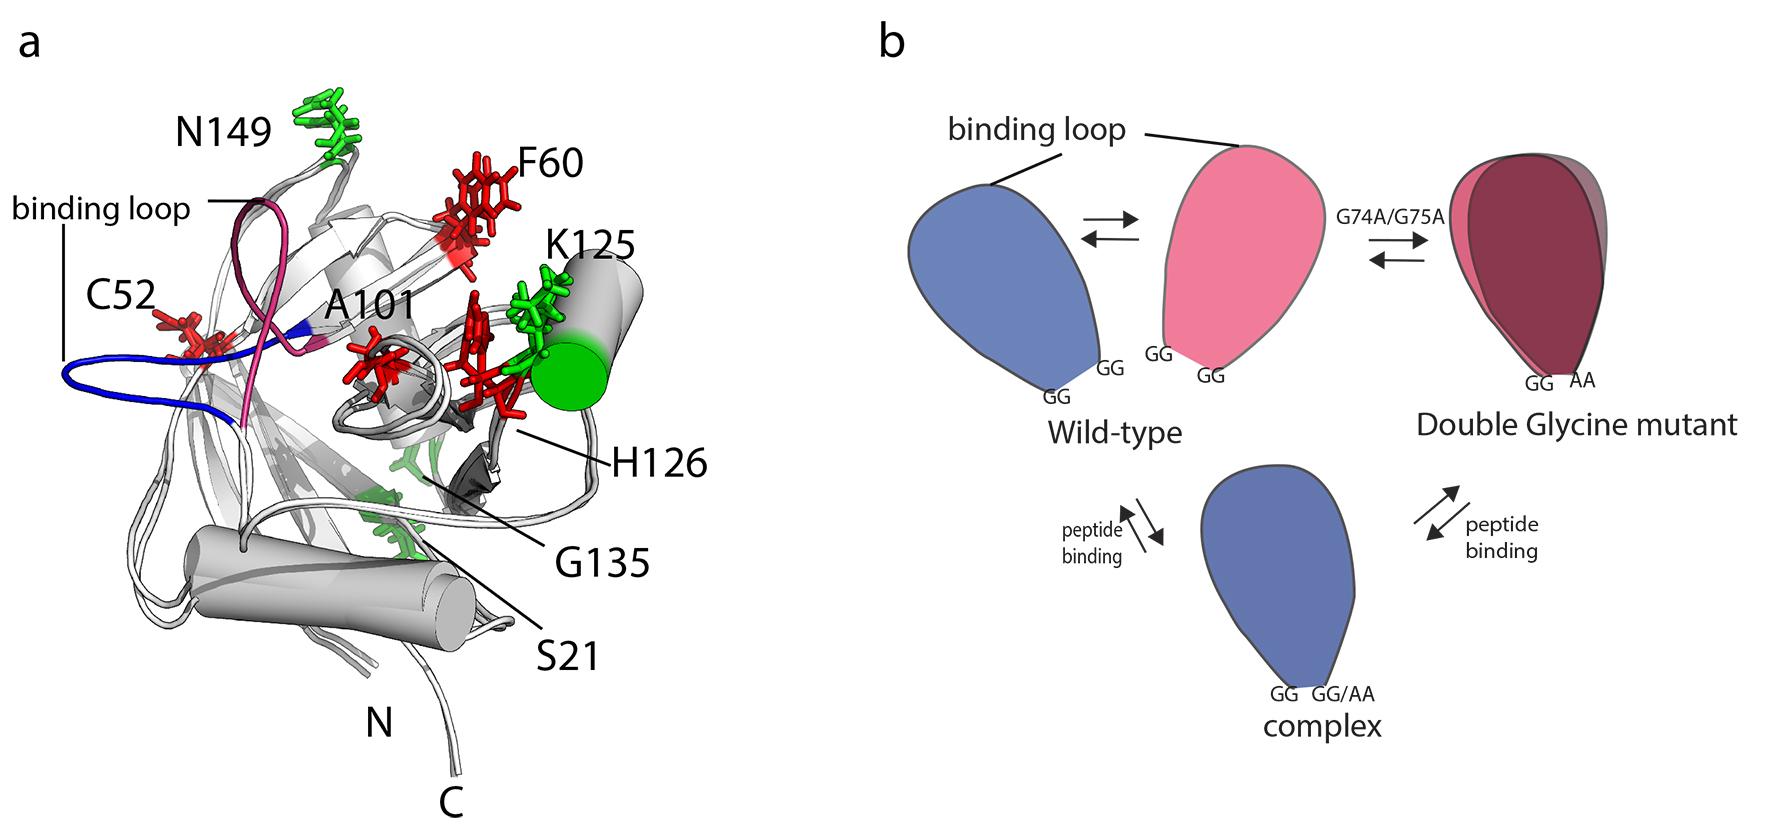 Enlarged view: Protein conformational dynamics and function